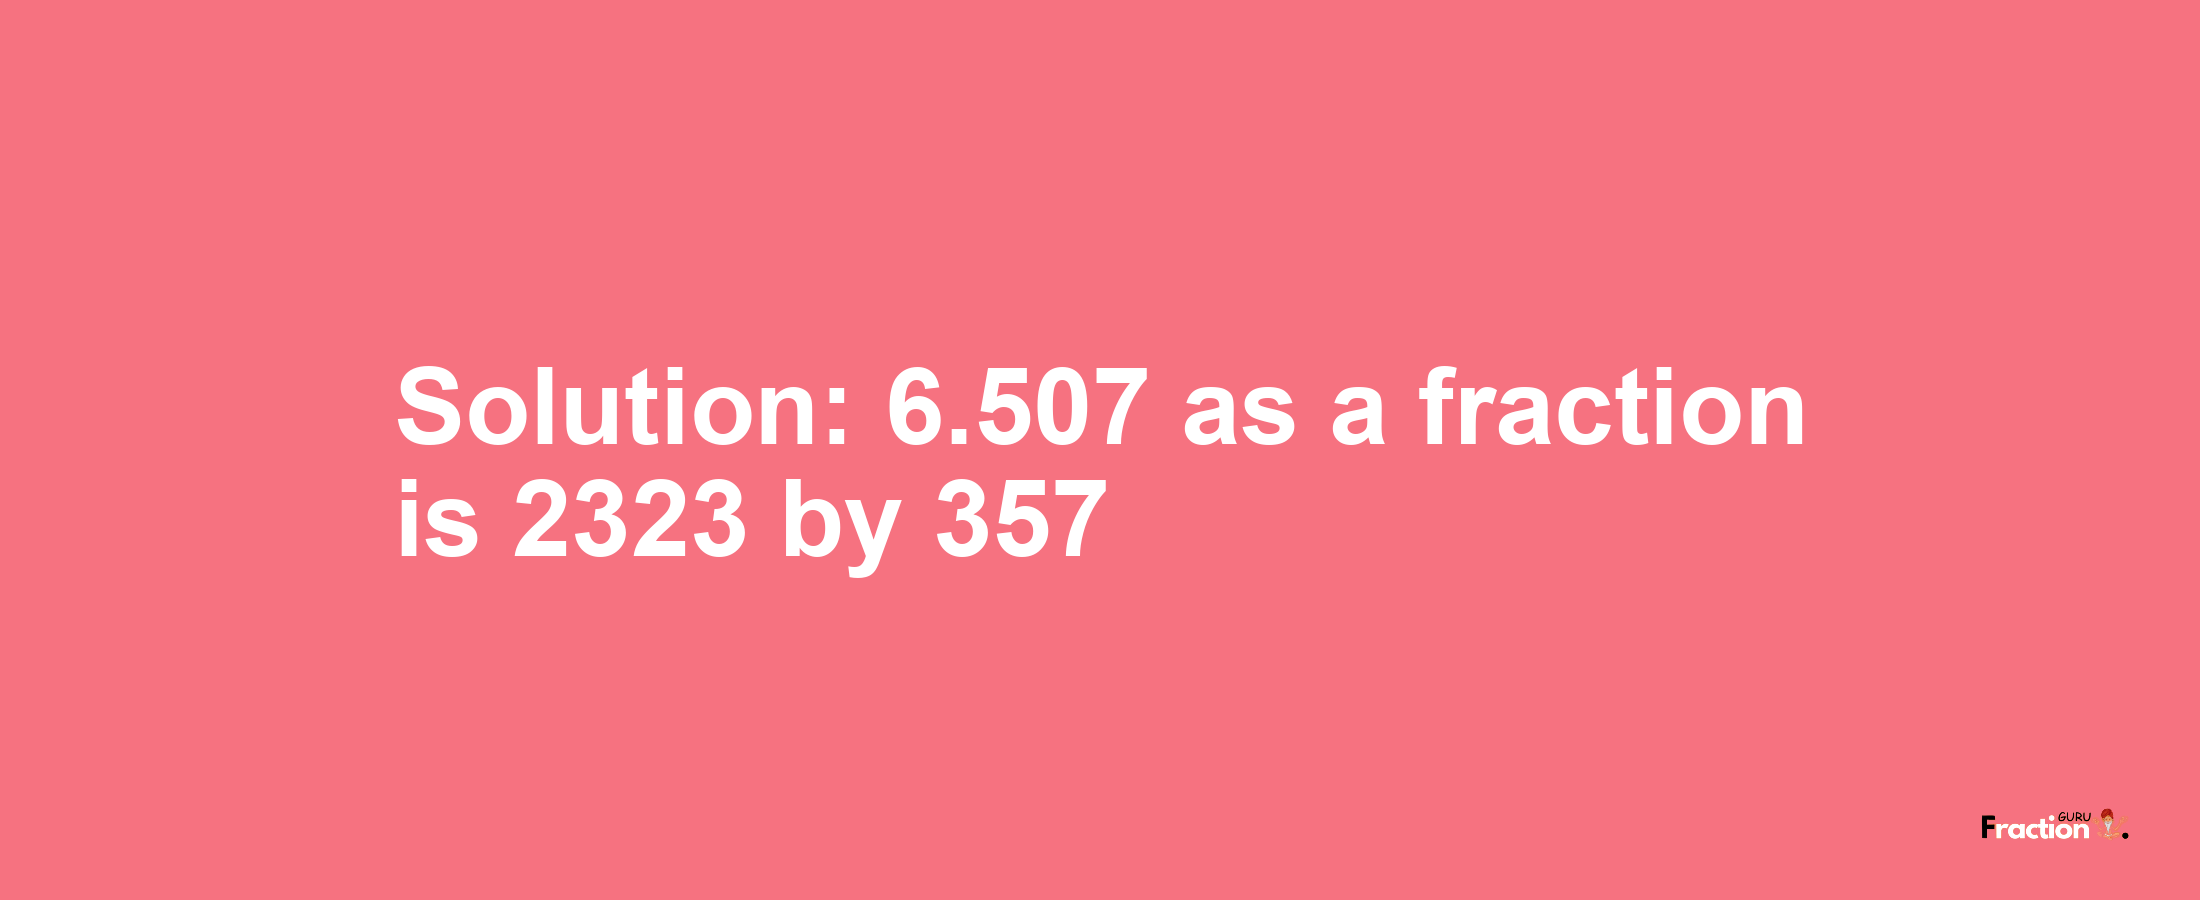 Solution:6.507 as a fraction is 2323/357